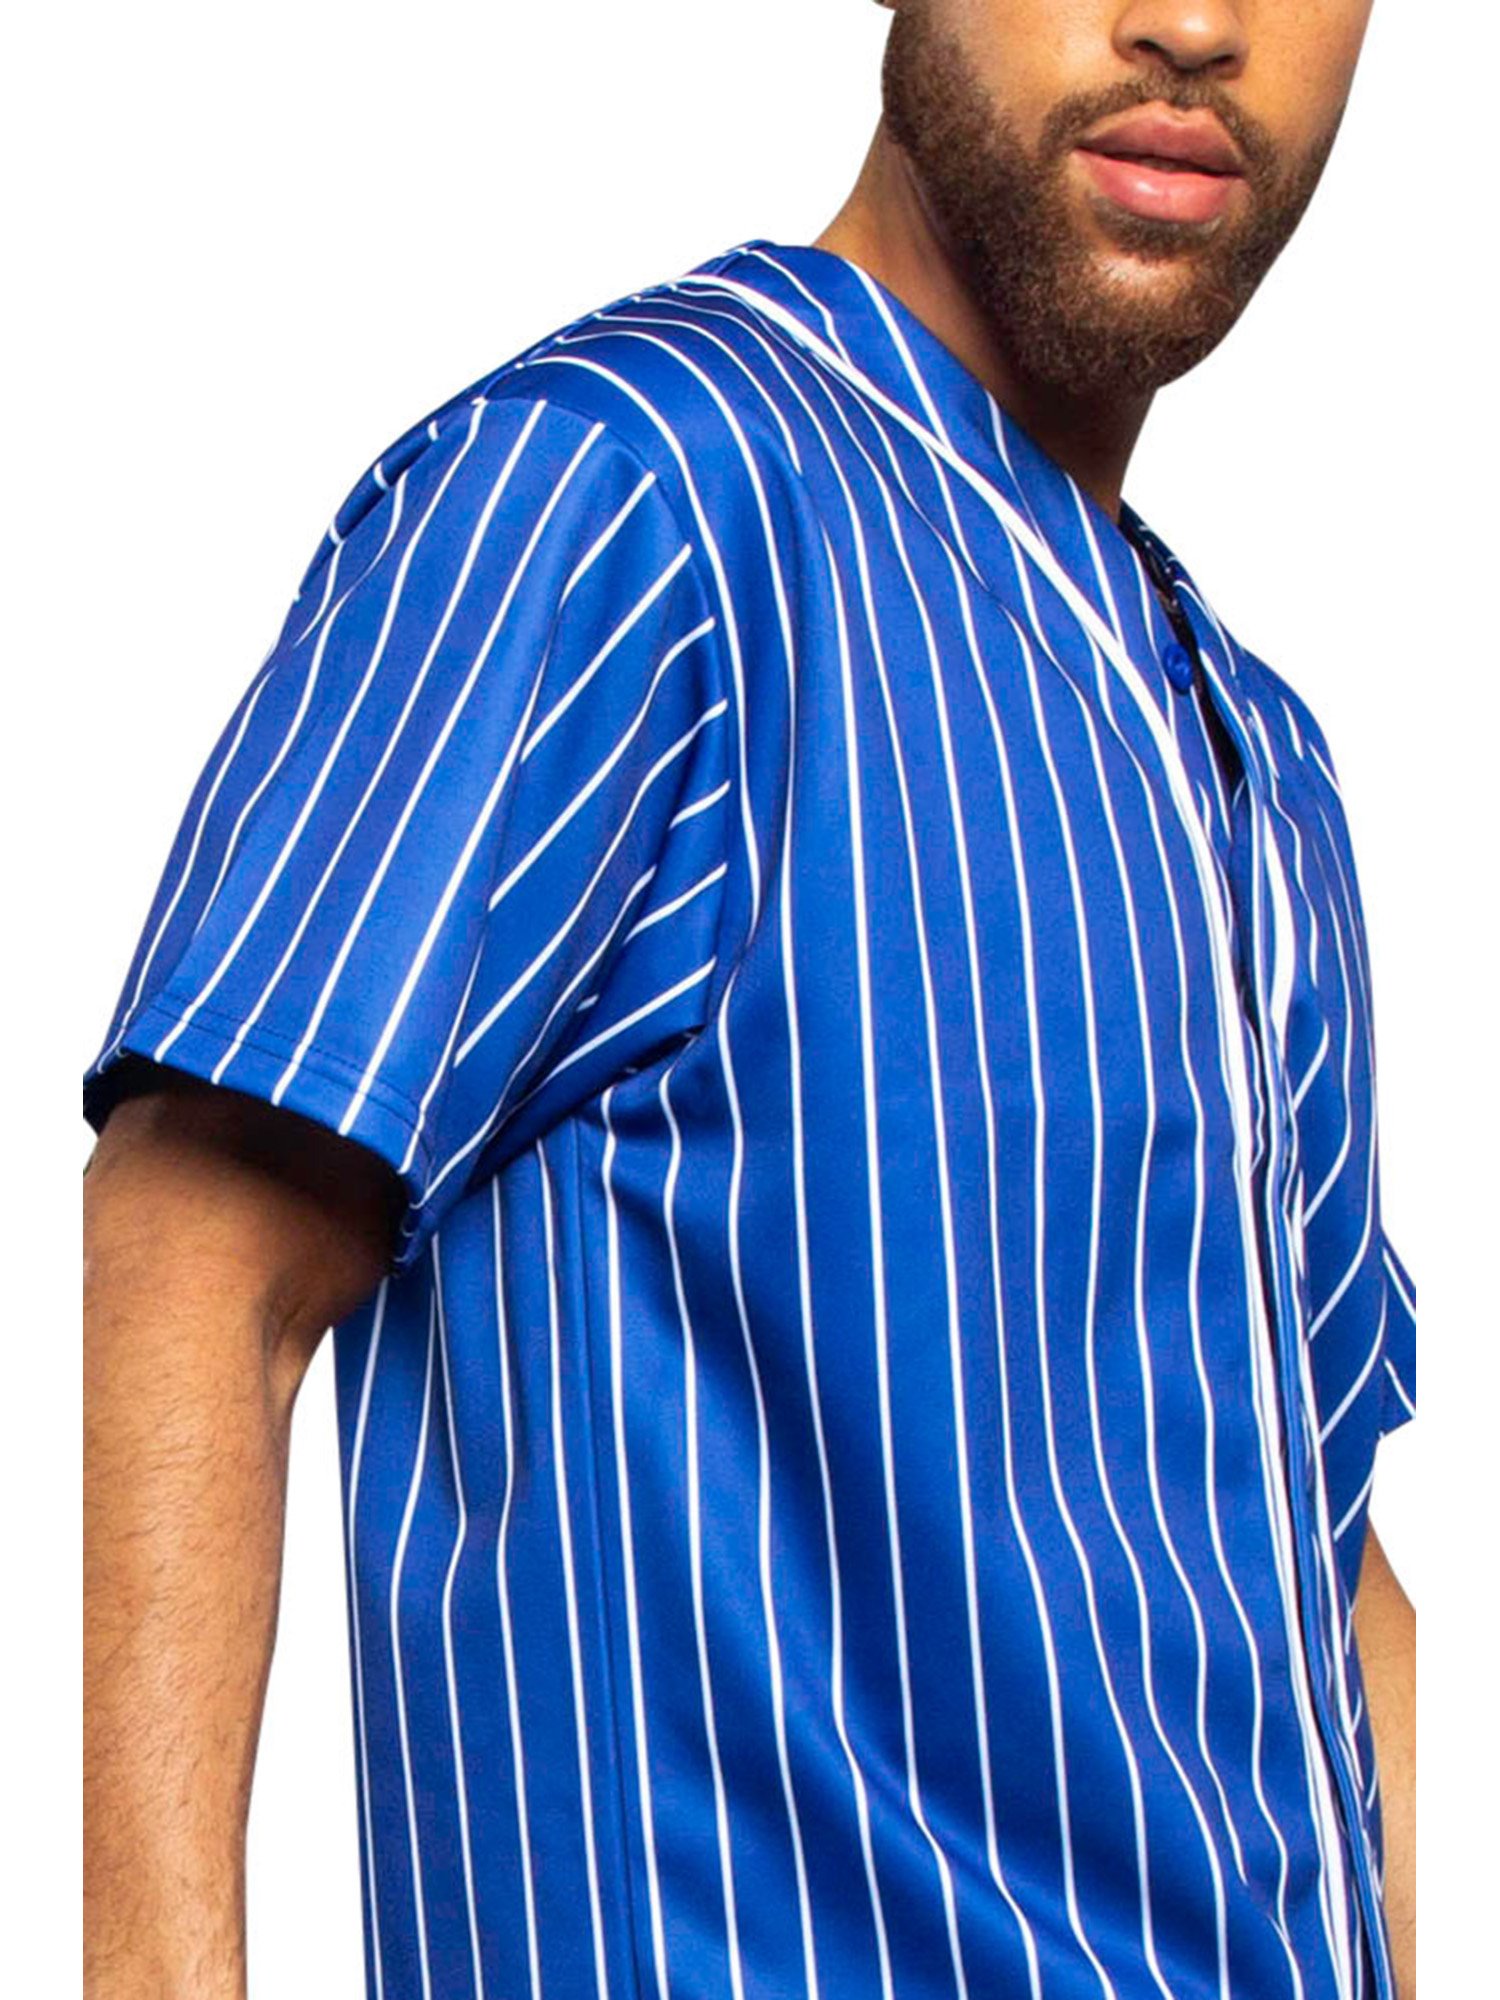  TOPTIE Sportswear Pinstripe Baseball Jersey for Men and Boy,  Button Down Jersey : Clothing, Shoes & Jewelry